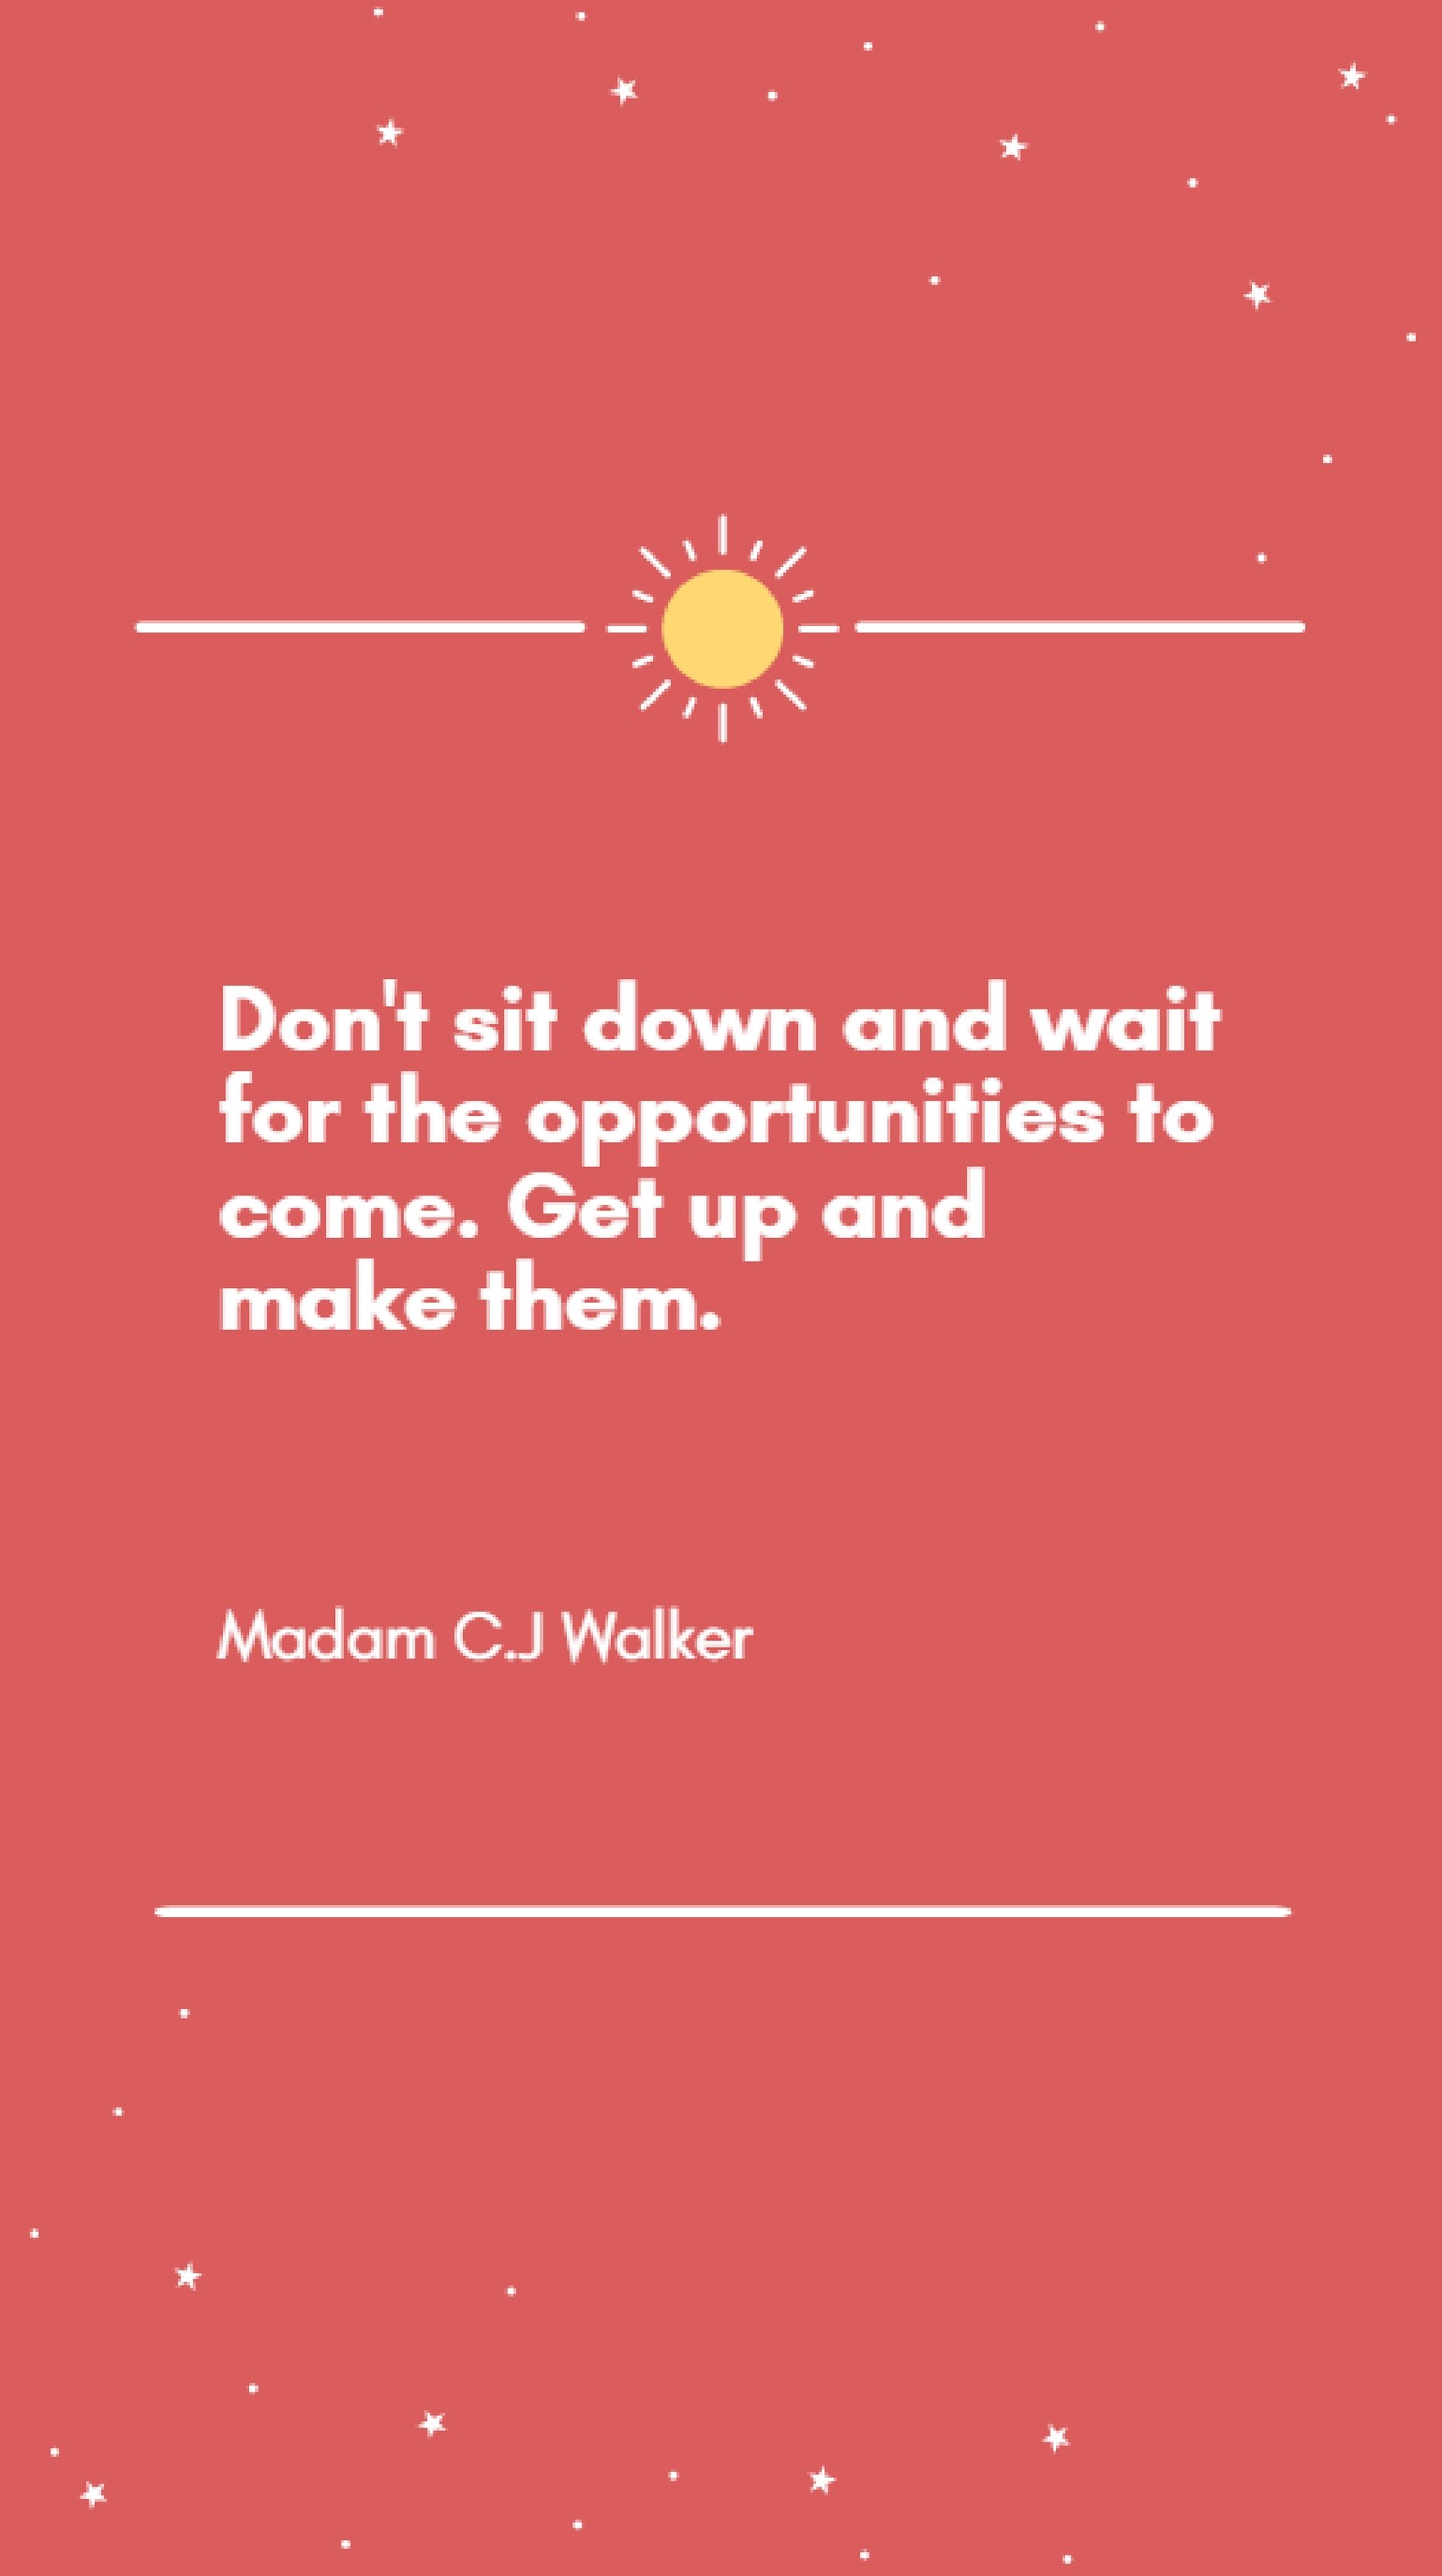 Madam C.J Walker - Don't sit down and wait for the opportunities to come. Get up and make them